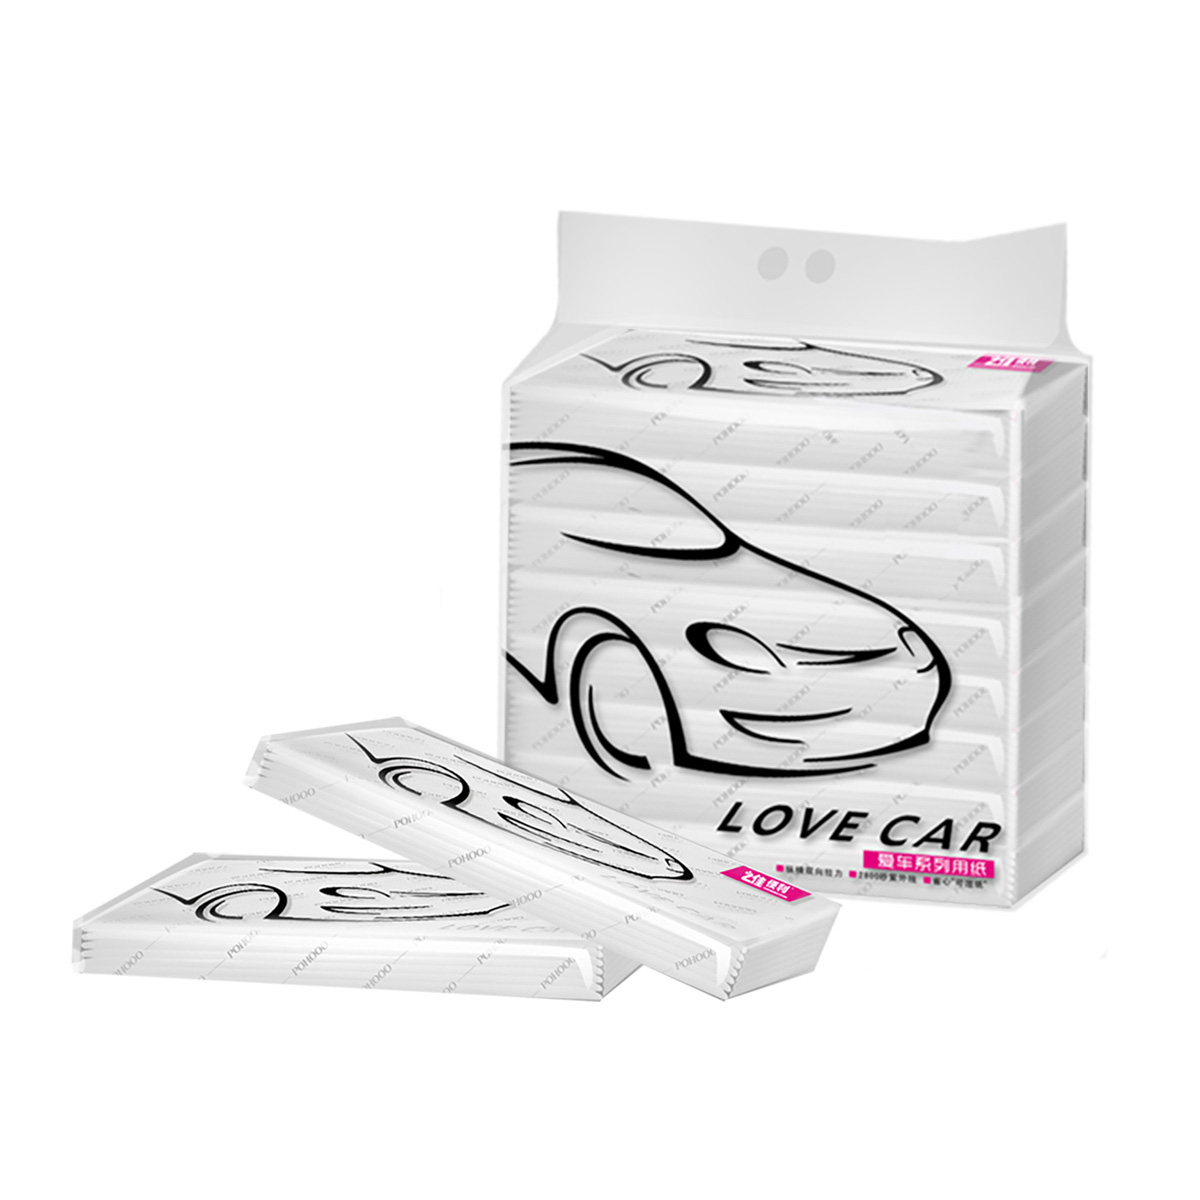 Piaohe love car series paper 40 sets